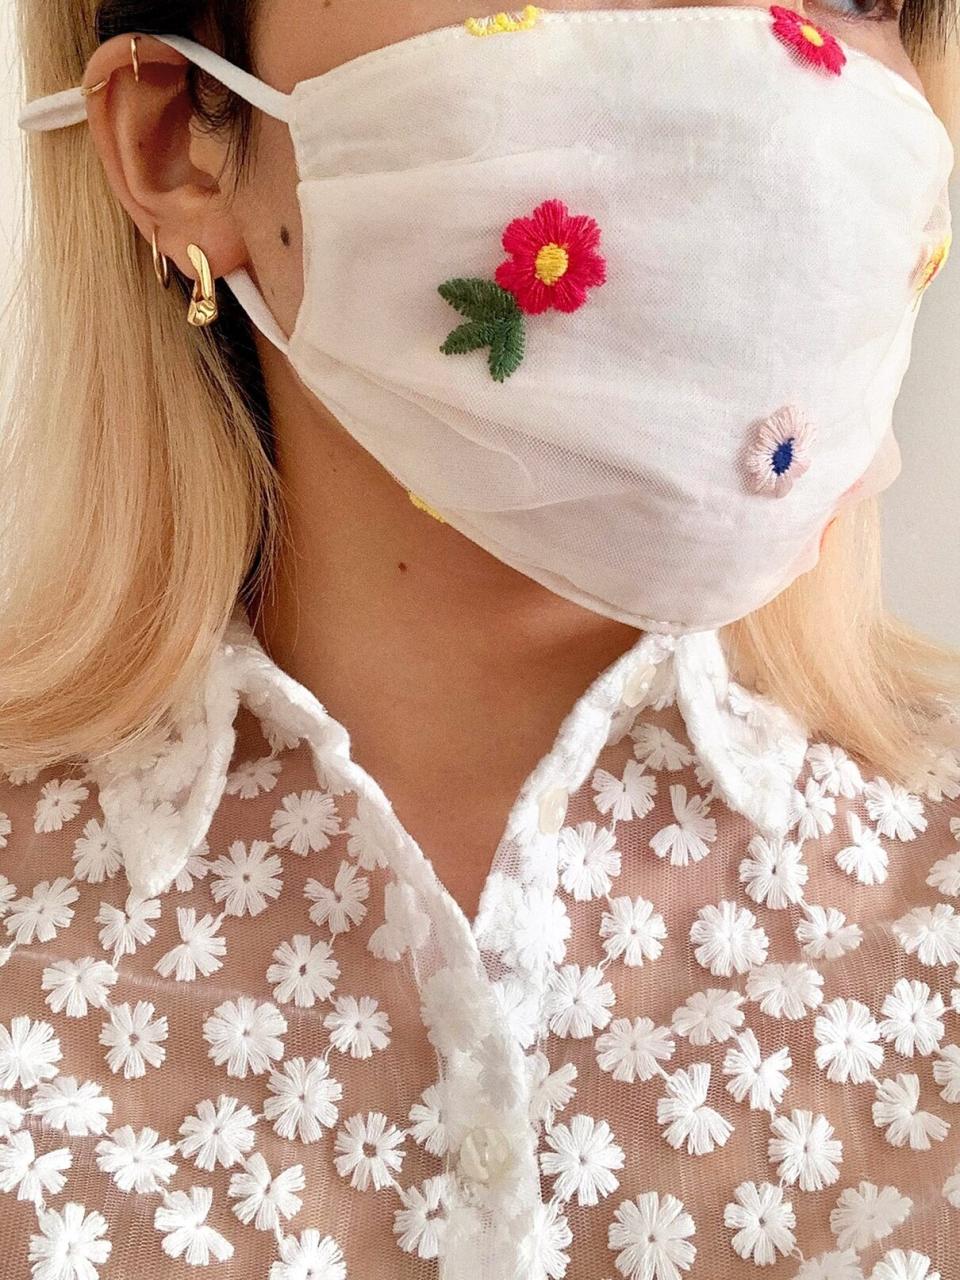 Everyone needs a mask nowadays, so she'll appreciate your thoughtfulness, especially for ones that are this pretty. <a href="https://fave.co/2Olxw3p" target="_blank" rel="noopener noreferrer">Find the set of two for $12 at BaubleBar</a>.